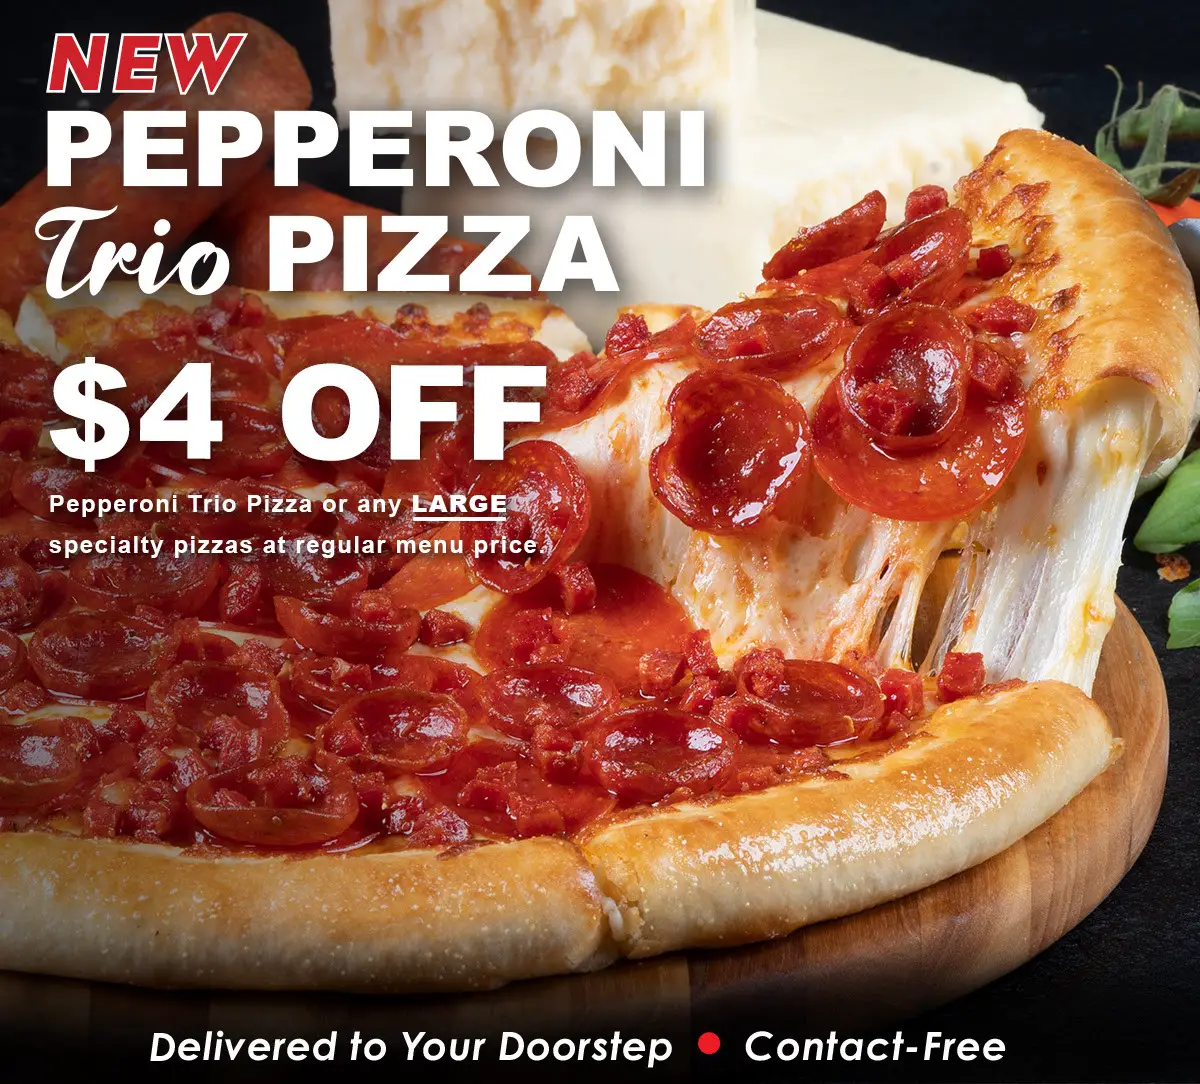 Pizza Guys National Pepperoni Pizza Day Get $4 Off Pepperoni Trio Pizza or Any Specialty Pizza